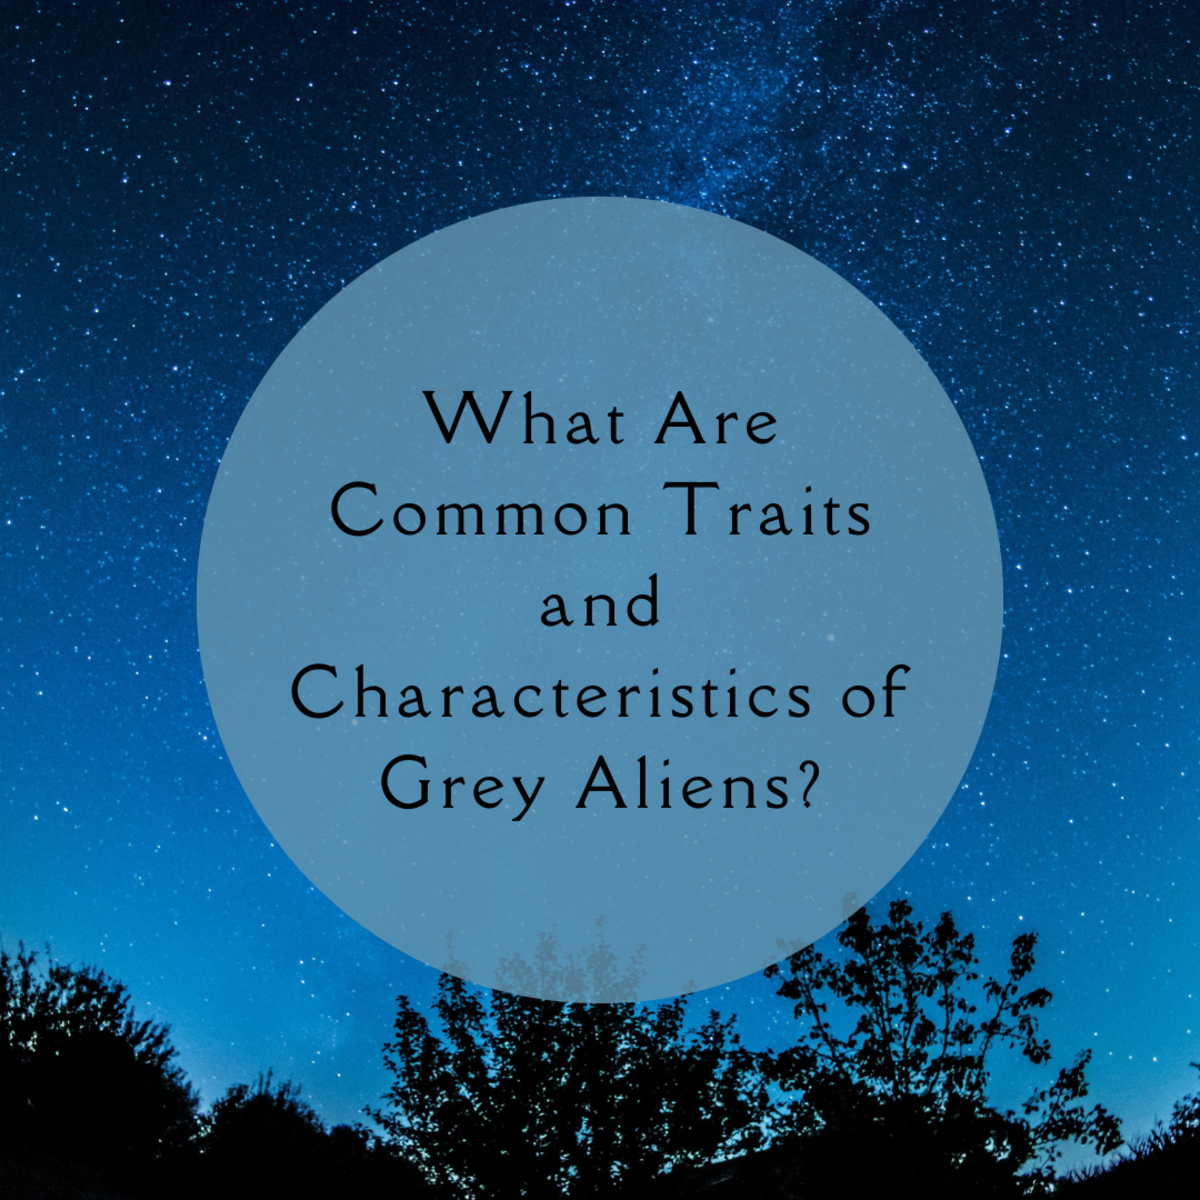 Characteristics and Traits of Alien Greys